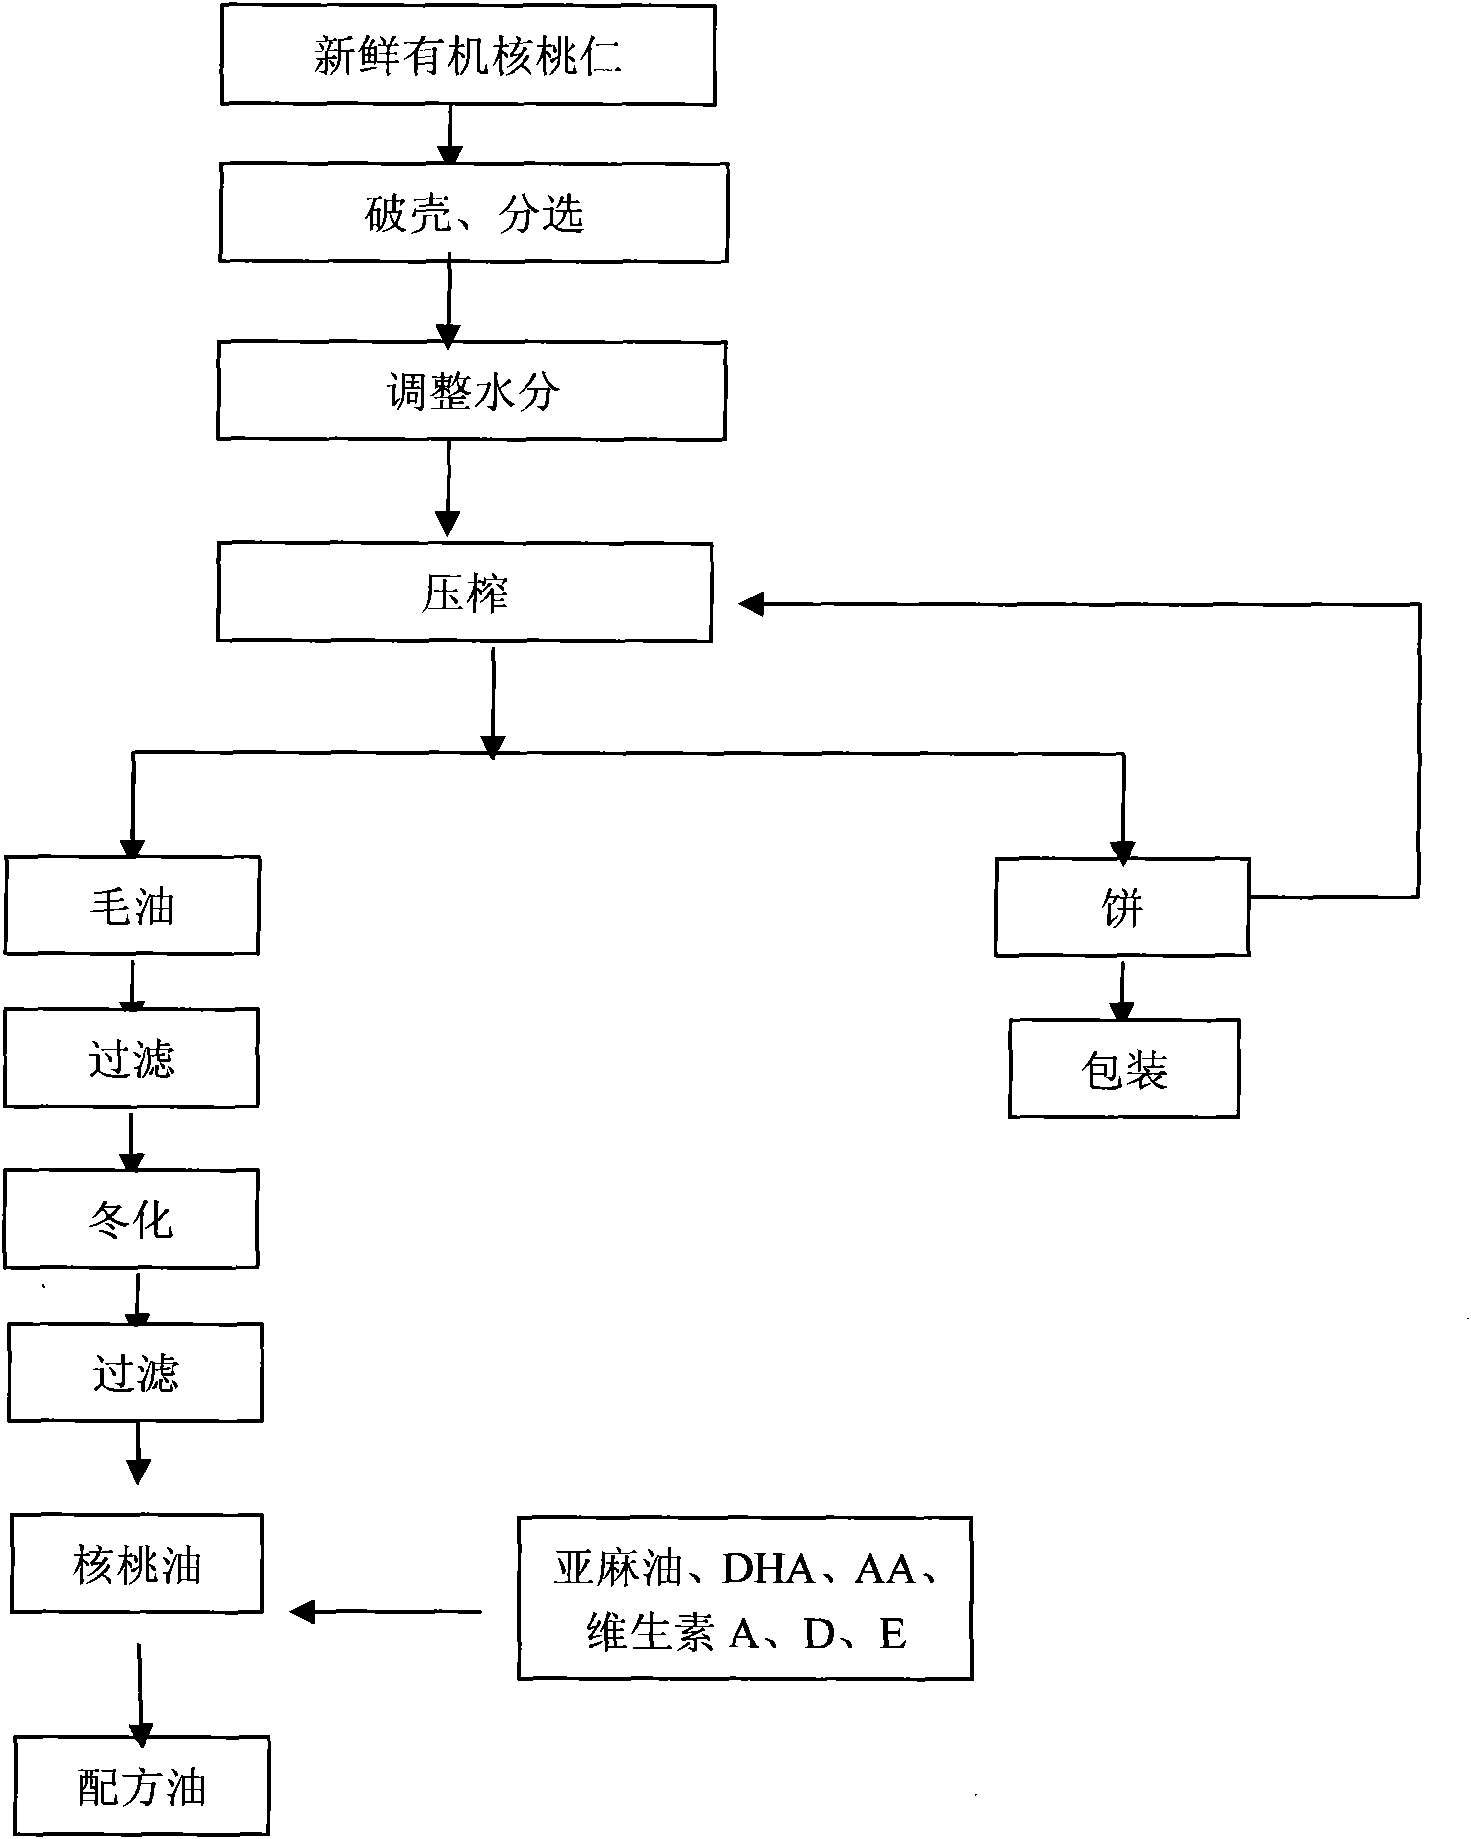 Method for preparing walnut oil and formulated product taking walnut oil as stroma